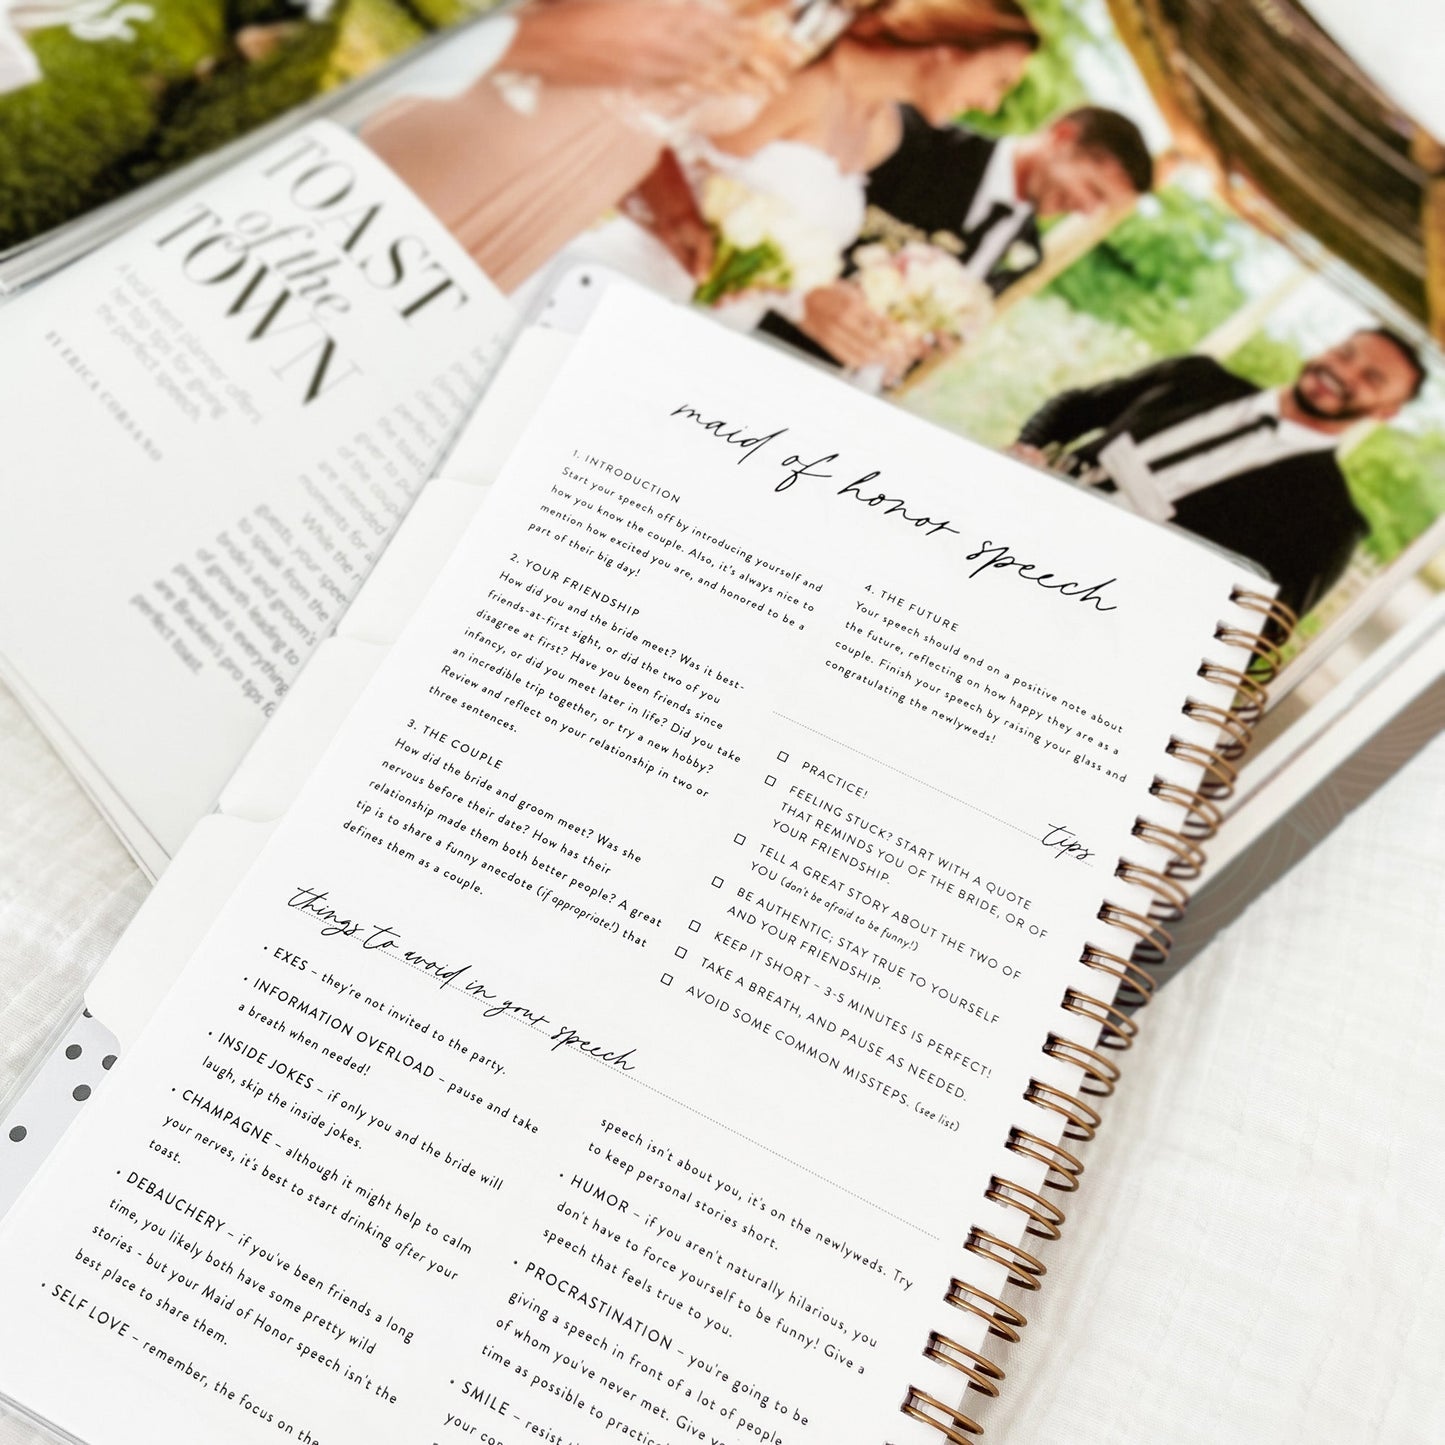 Ferns & Foliage Maid of Honor Planner